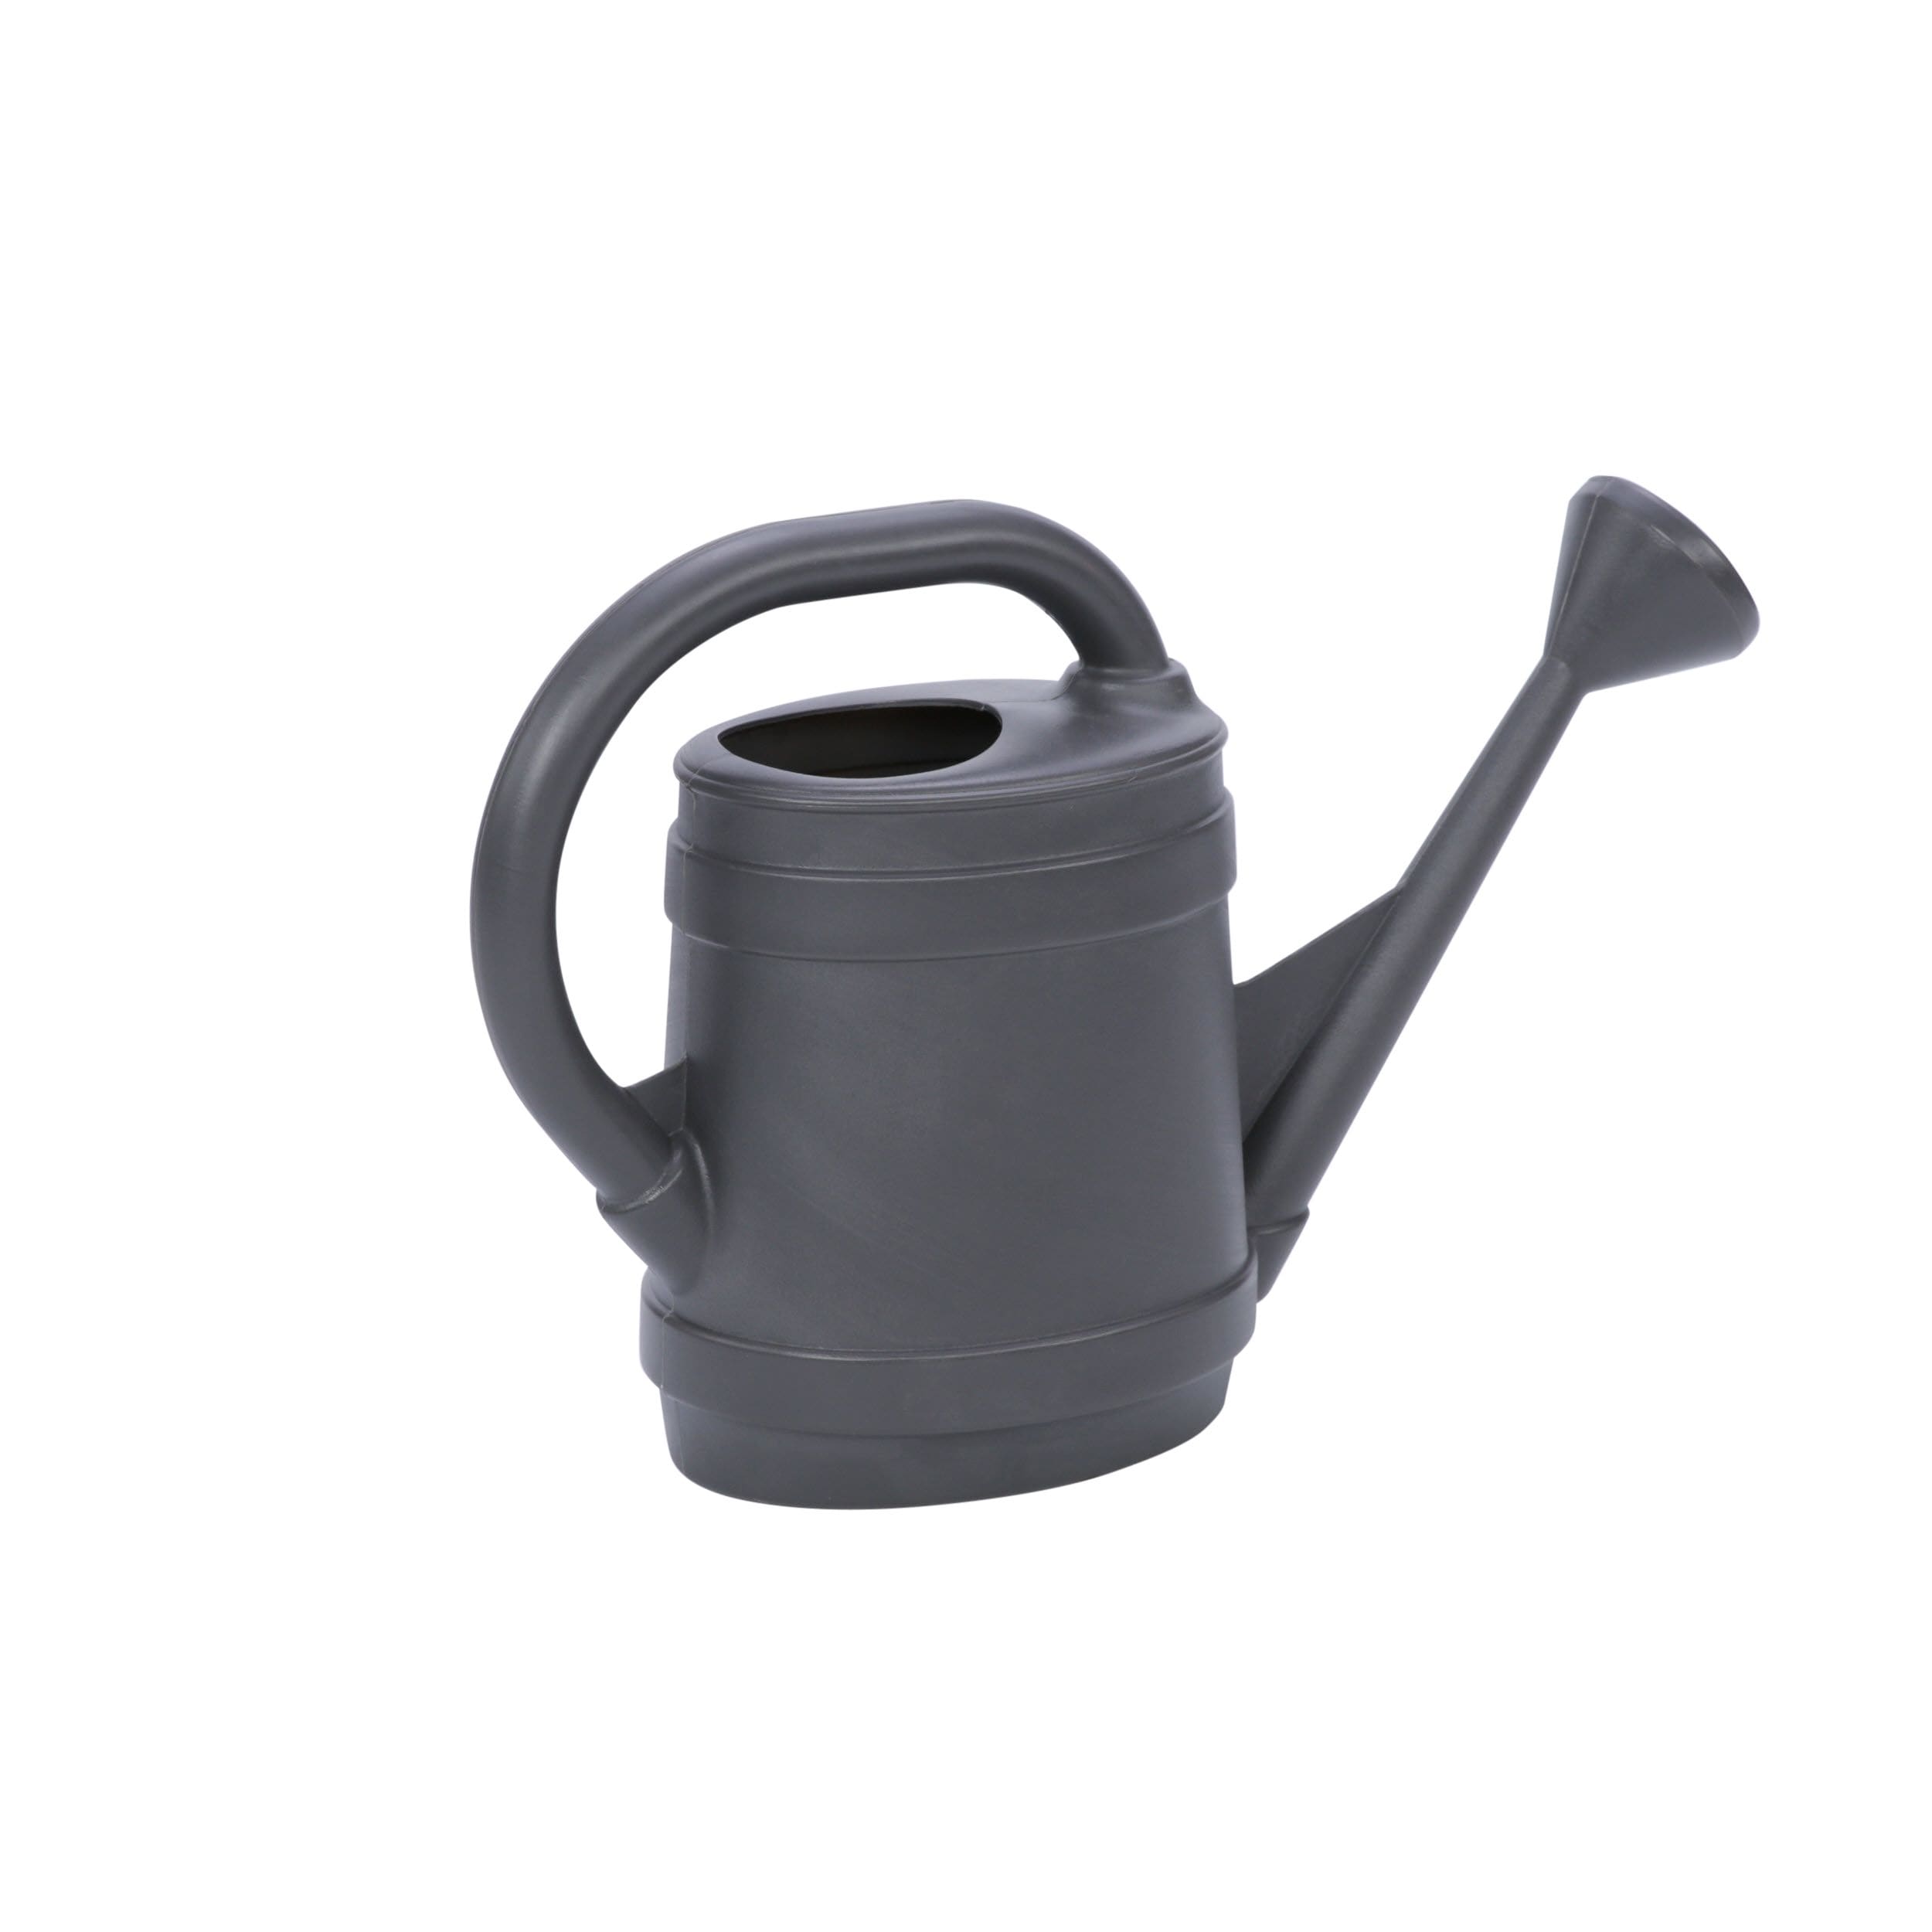 Details about   Durable Watering Can 2 Gallon Slate Lightweight Home Garden Outdoor Water Holder 